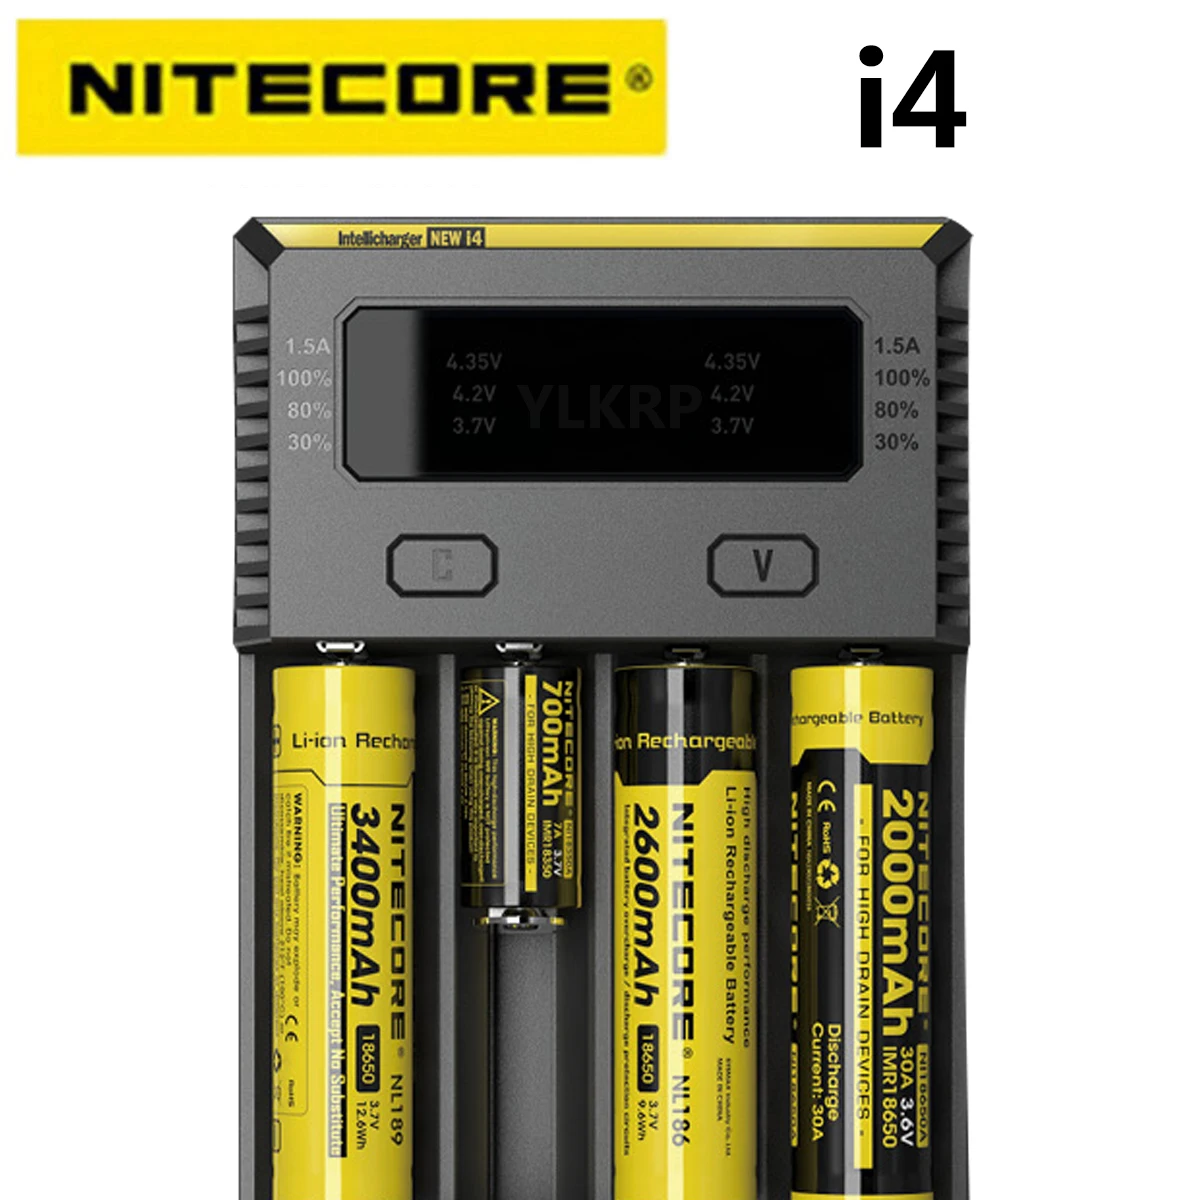 NITECORE New i4 2018 smart battery charger For 18650 26650 16340 & car charger 